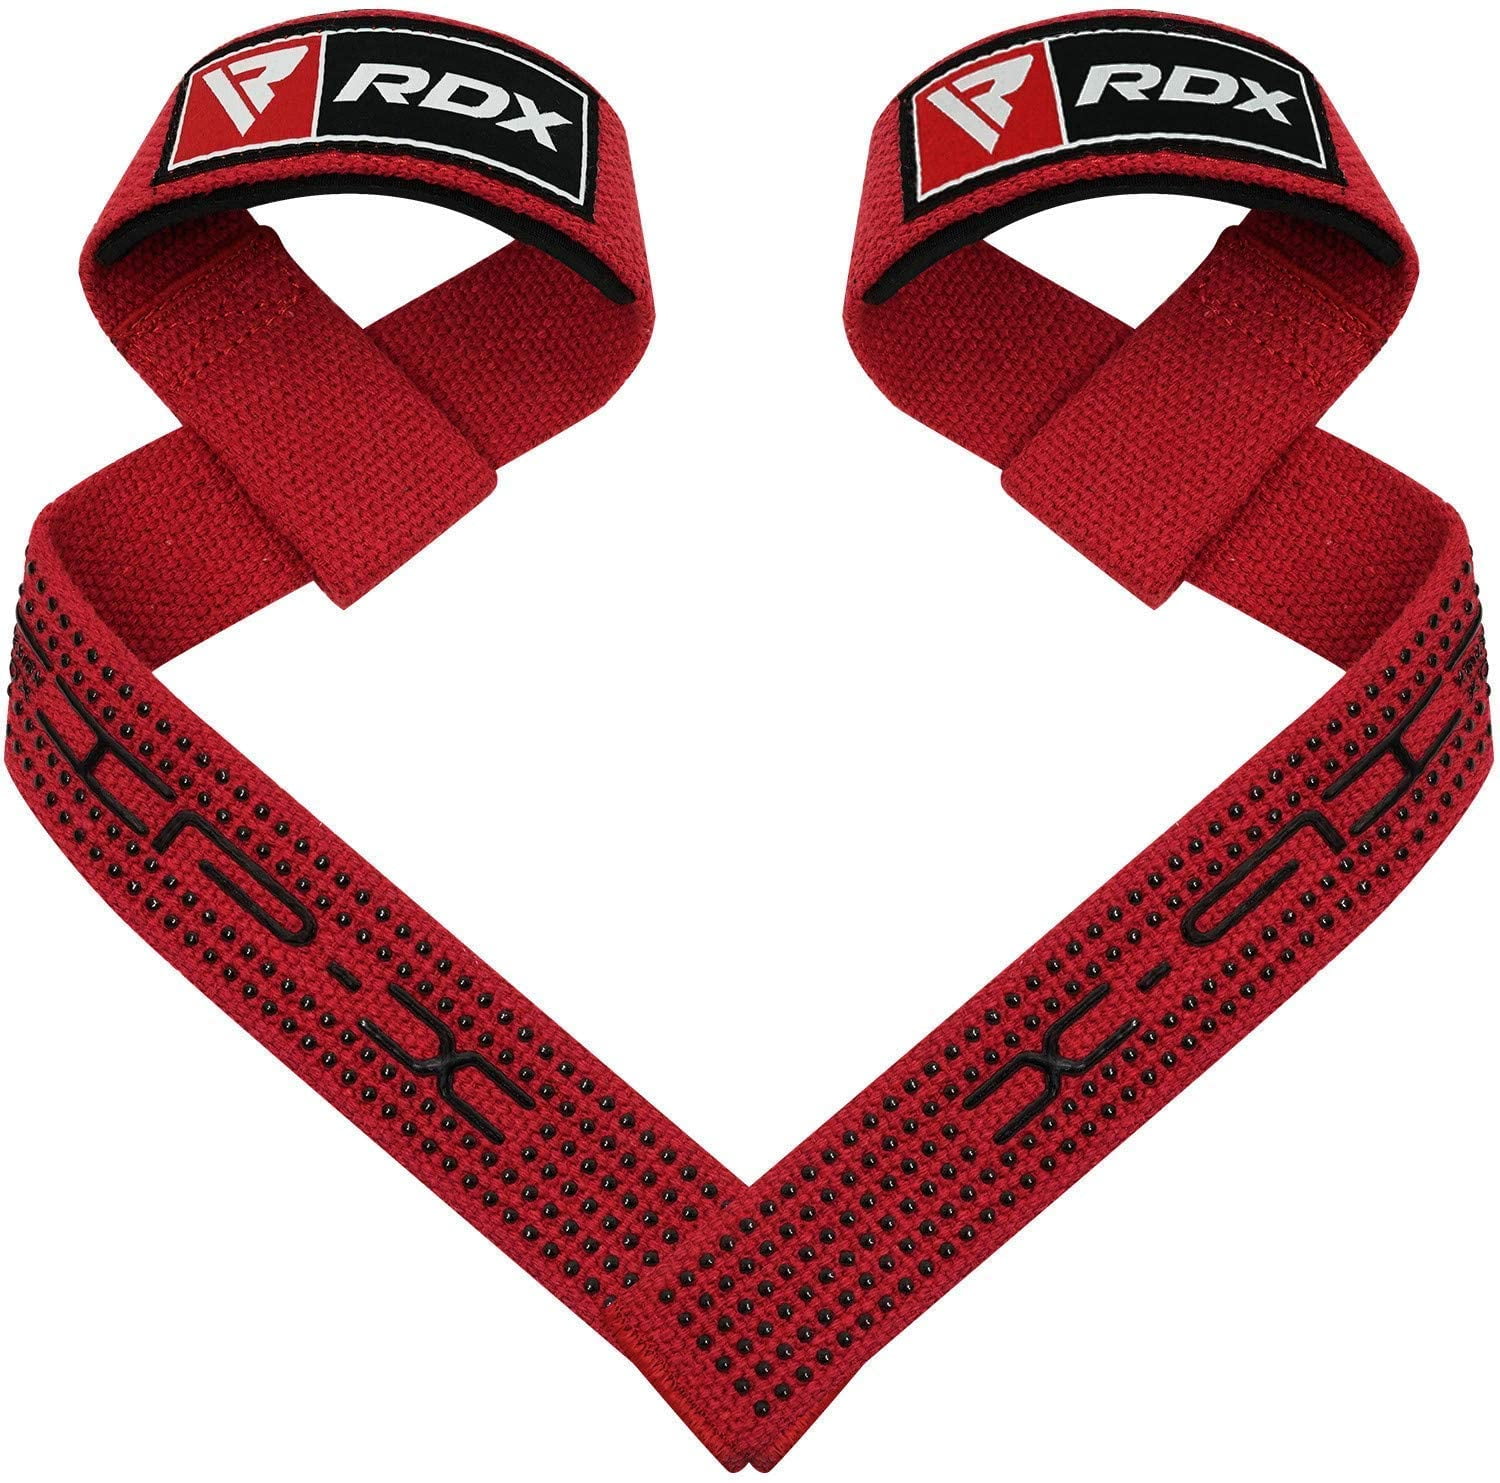 RDX Weight Lifting Gym Straps Wrist Support Wraps Hand Bar Bodybuilding  Training Workout 